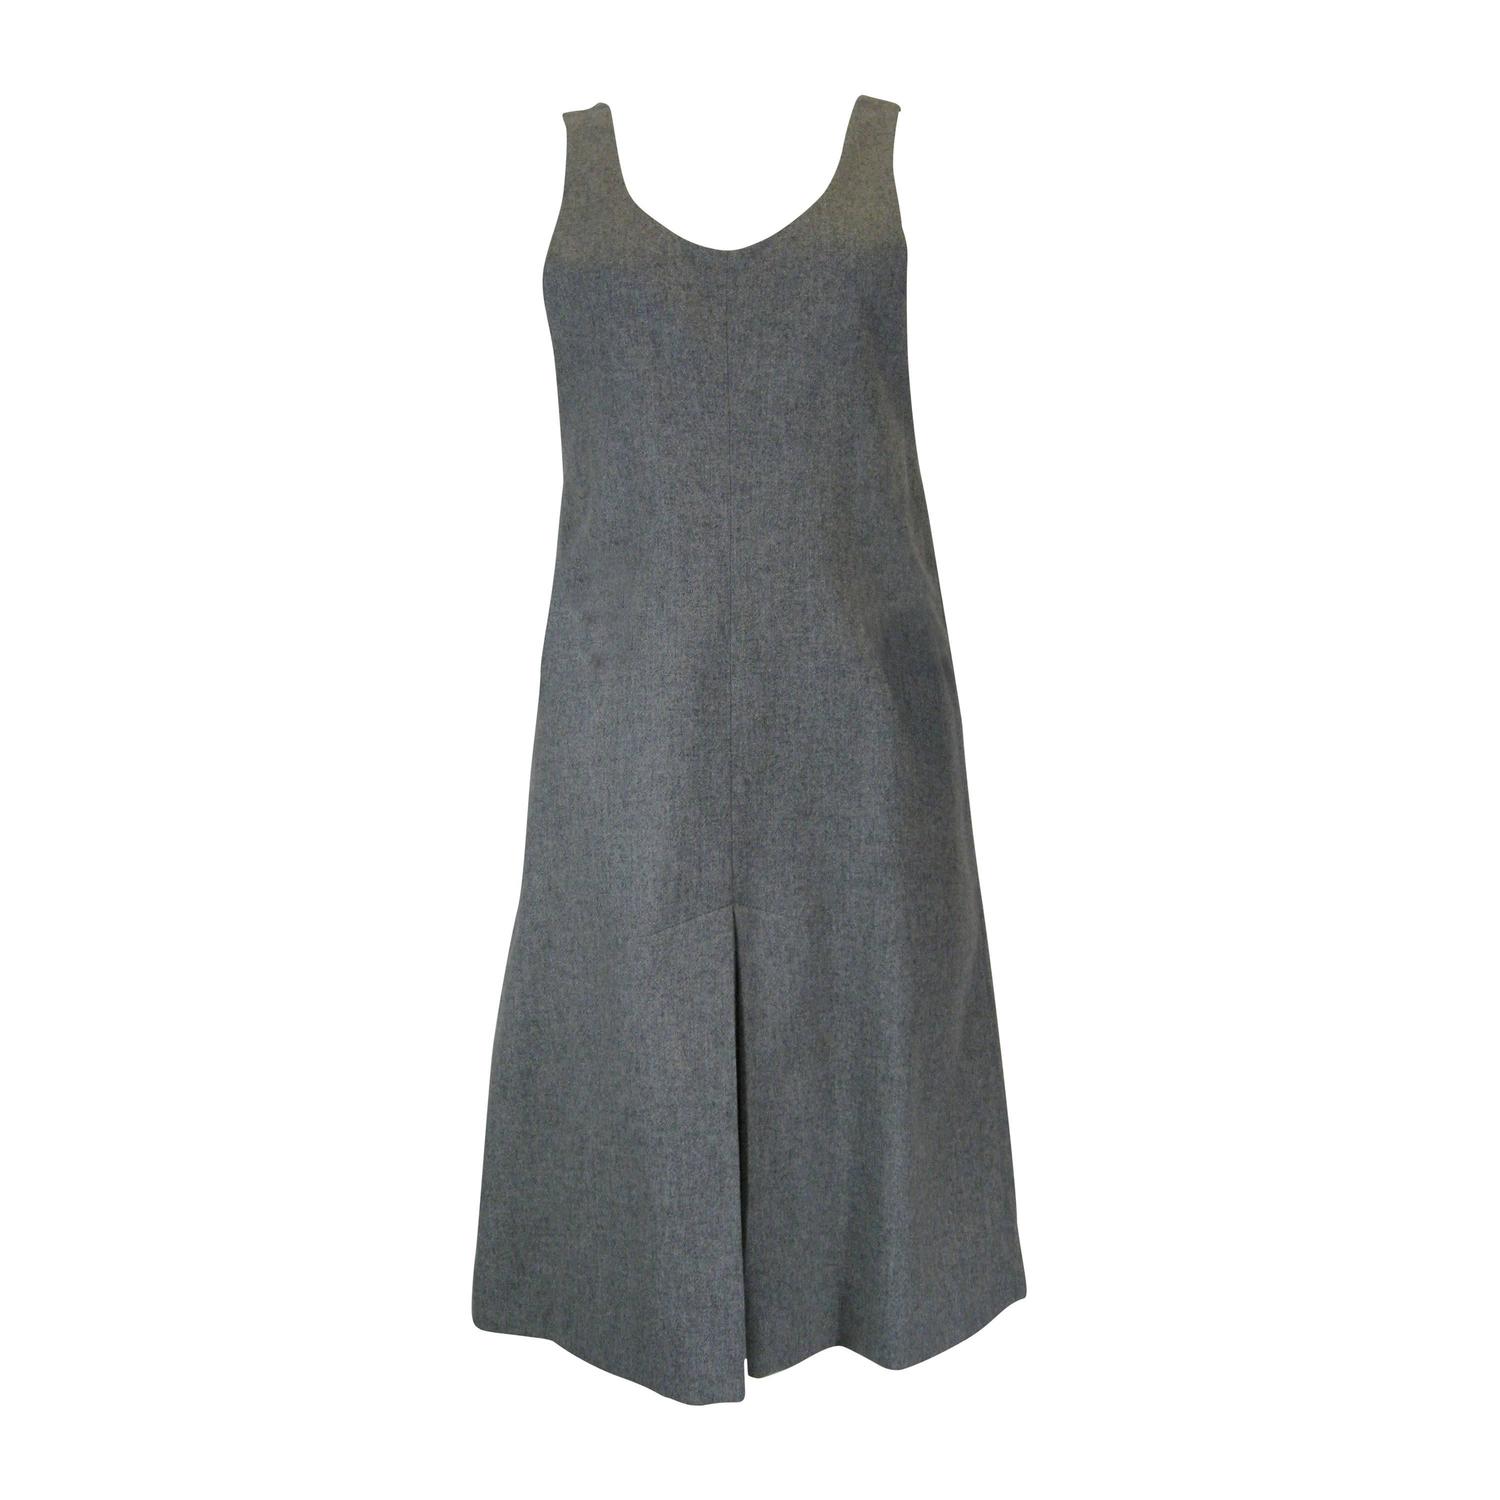 Mary Quant Grey Wool Jumper at 1stdibs